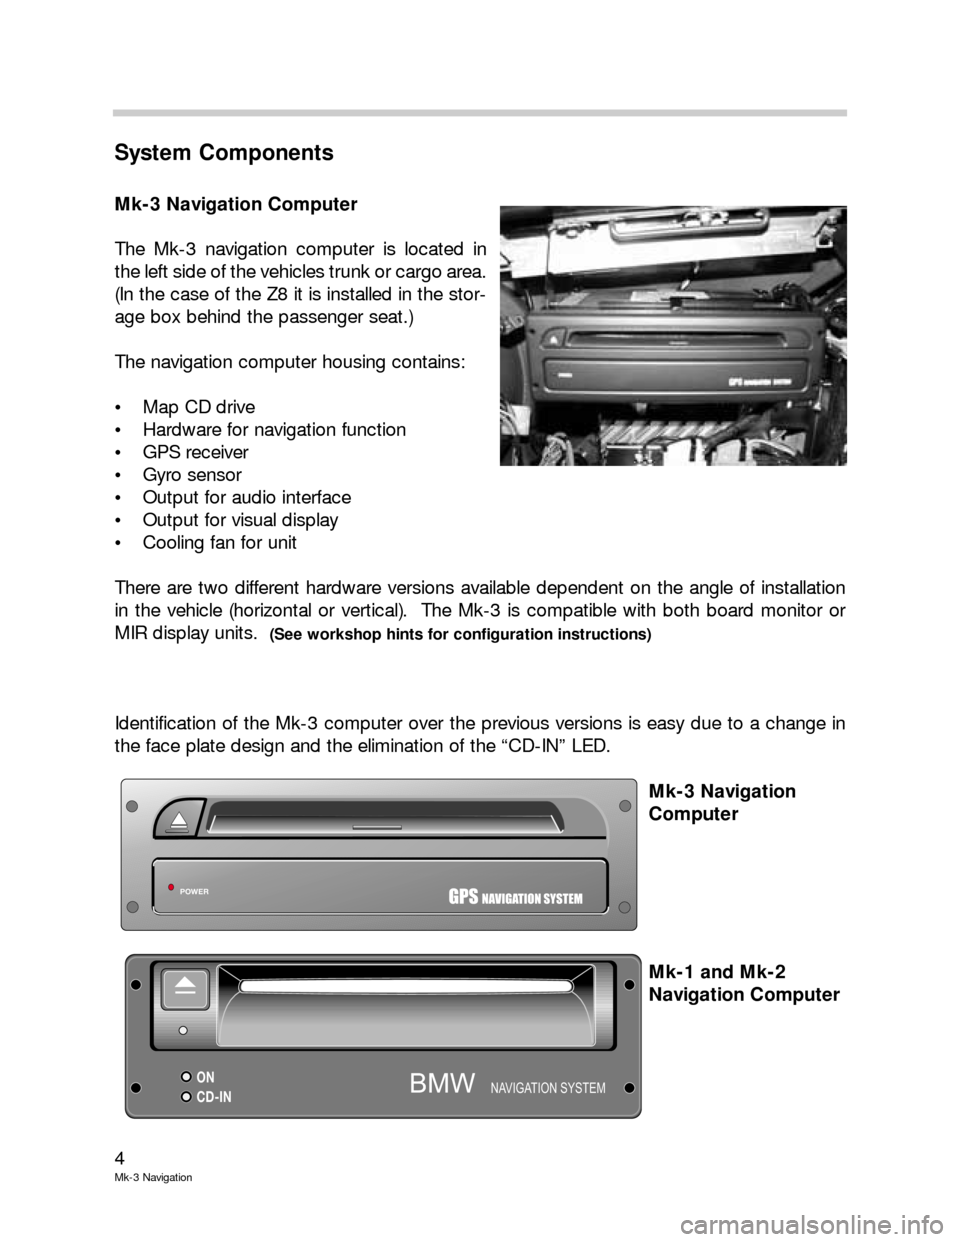 BMW X5 2006 E53 Mk3 Navigation System Manual 4
Mk-3 Navigation
System Components
Mk-3 Navigation Computer
The Mk-3 navigation computer is located in
the left side of the vehicles trunk or cargo area.
(In the case of the Z8 it is installed in the